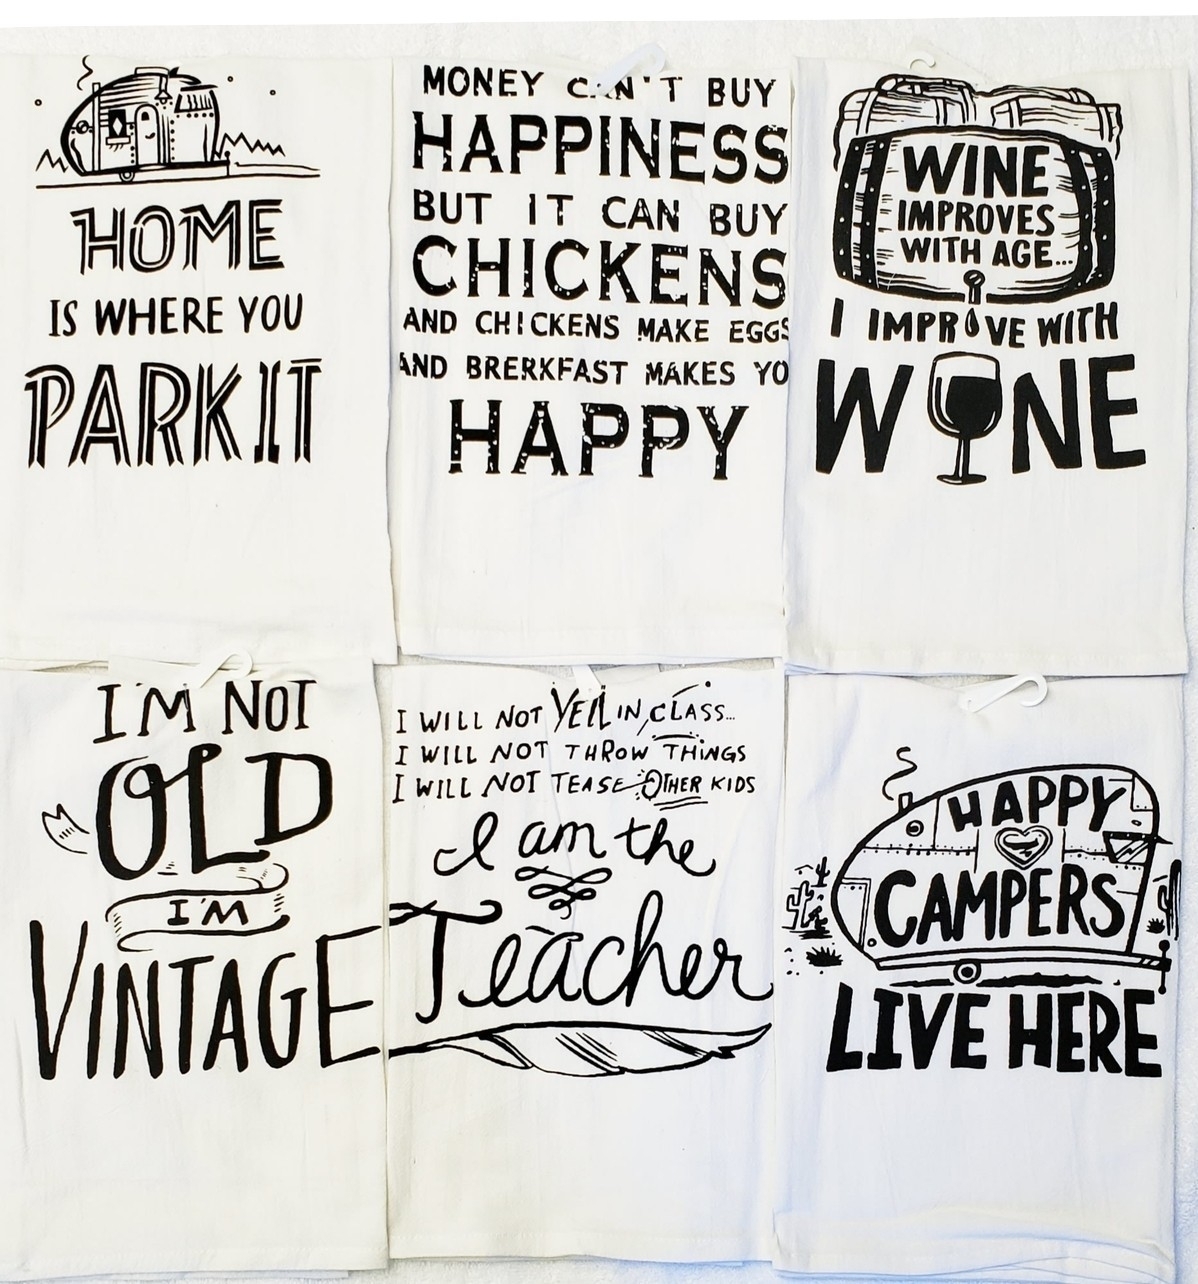 Happy Camper Dish Towel - White Or Gray